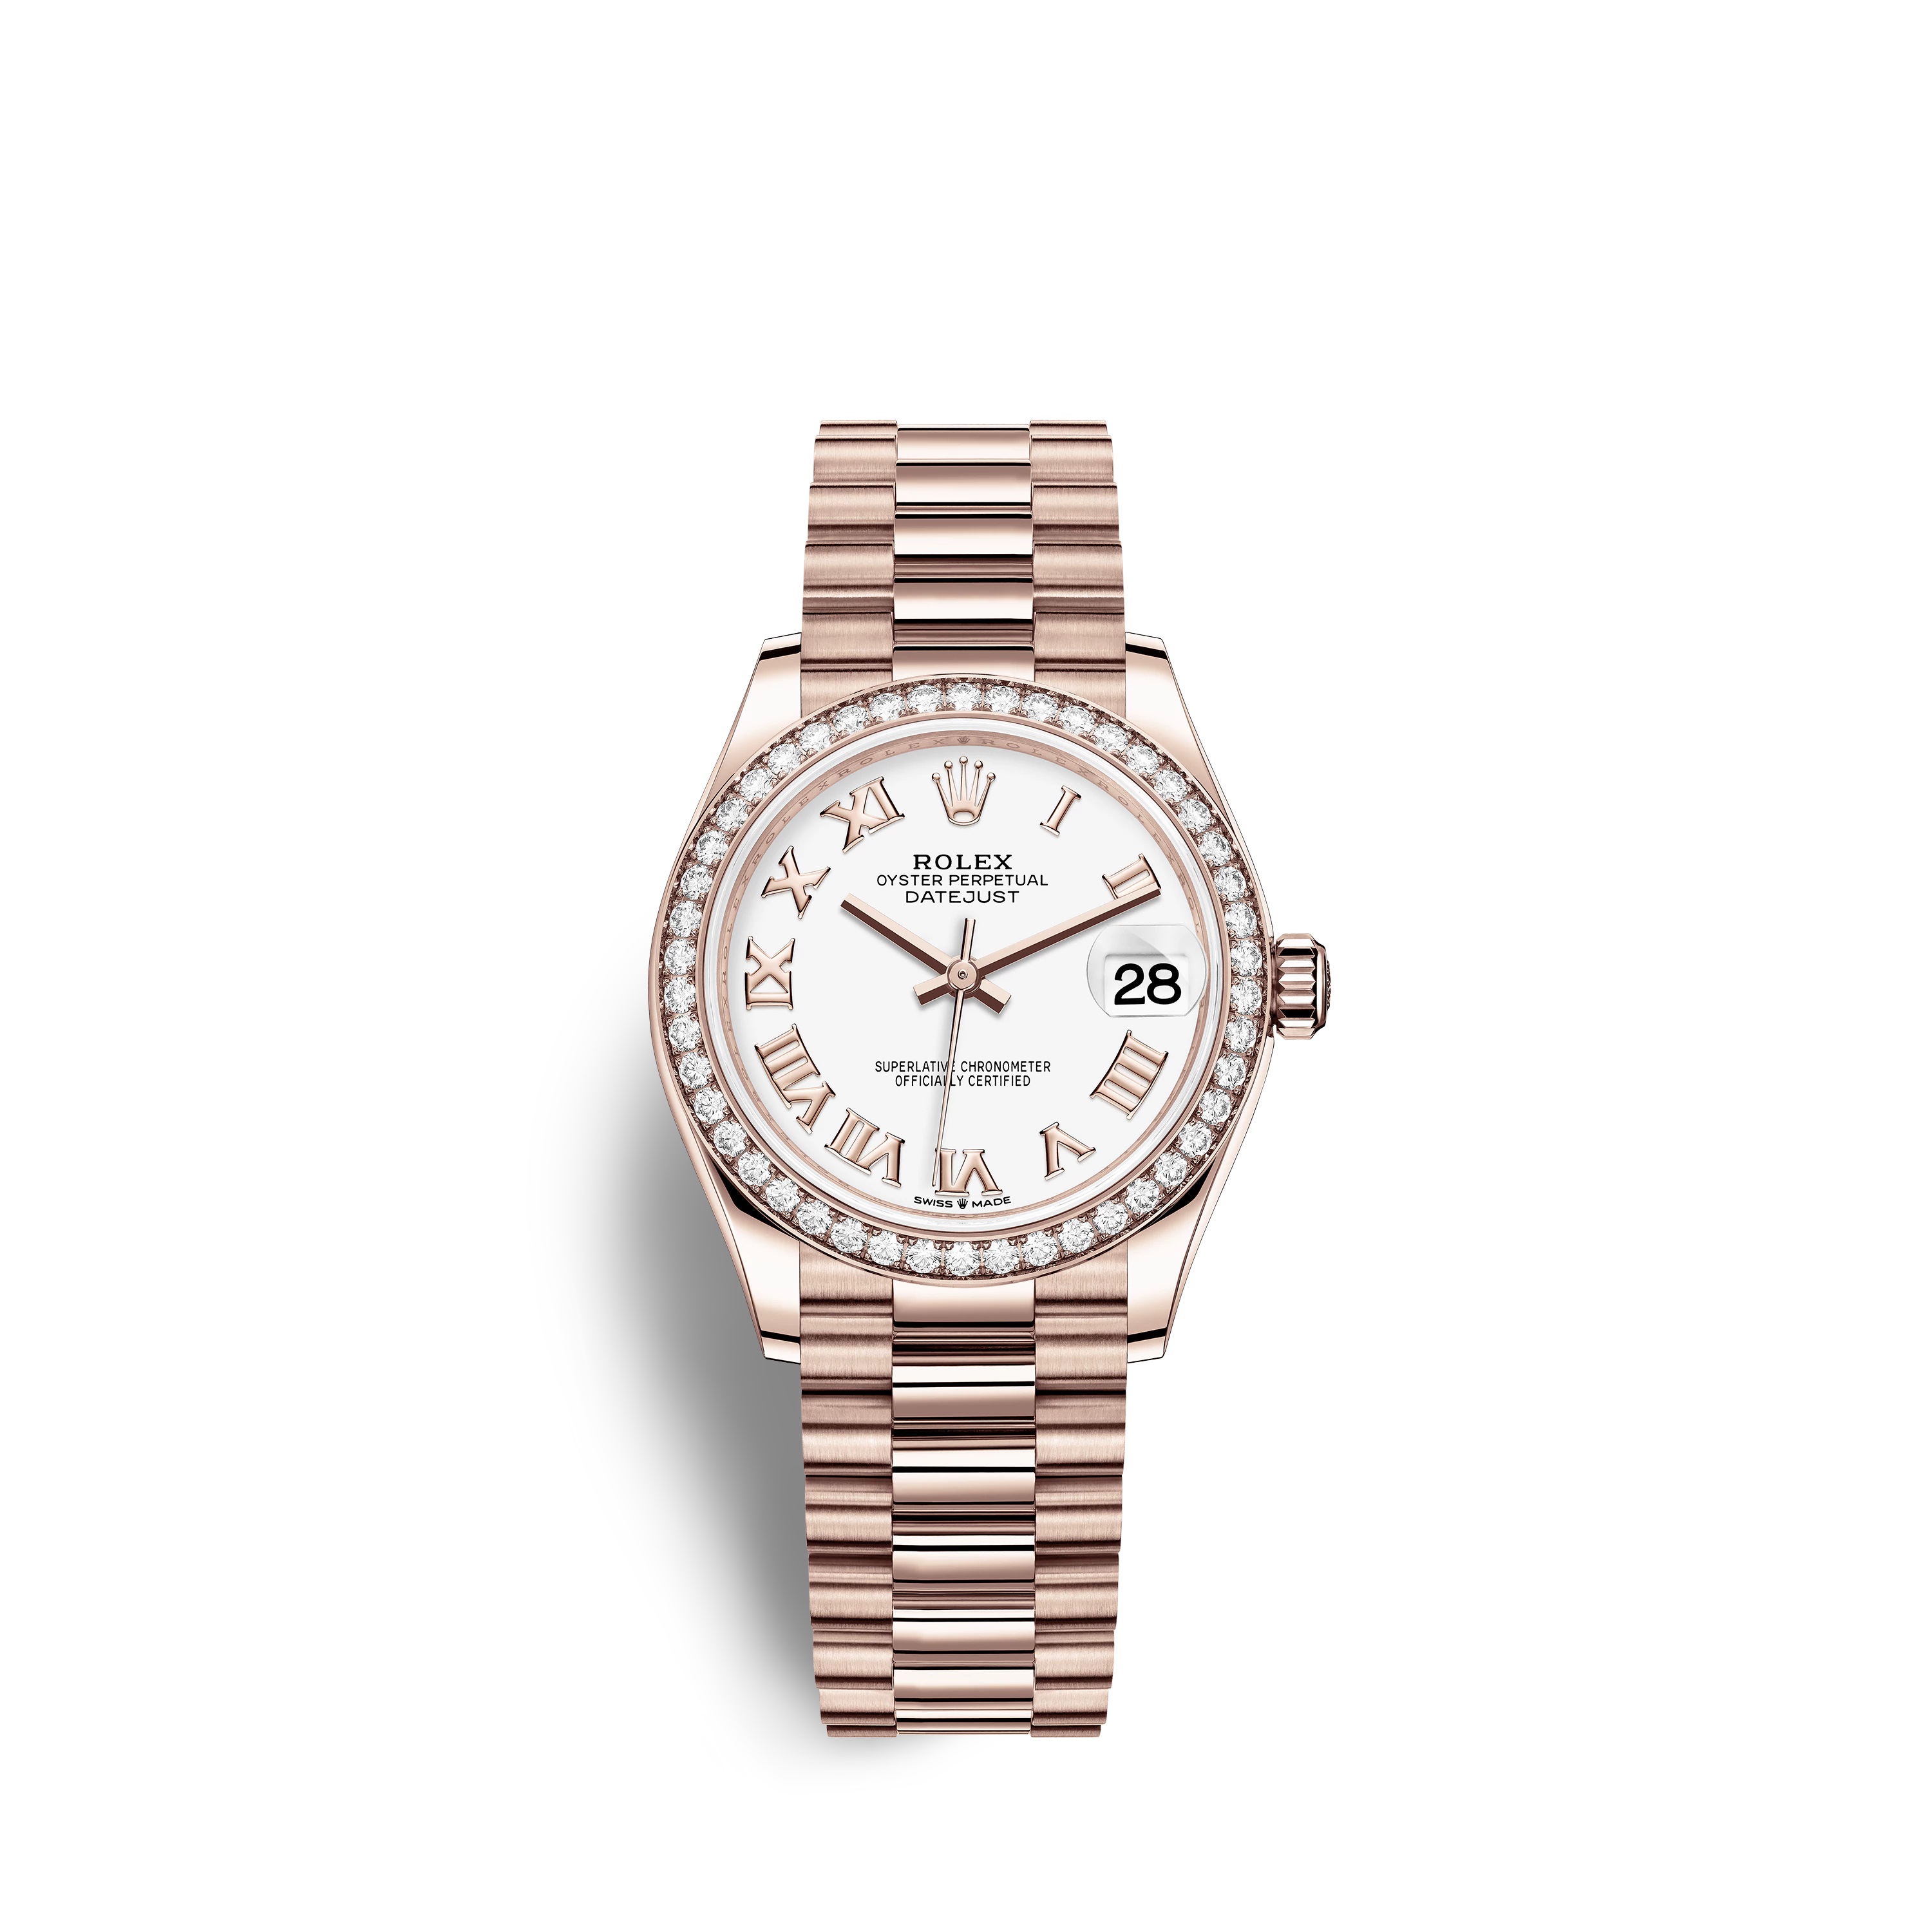 Datejust 31 278285RBR Rose Gold Watch (White)